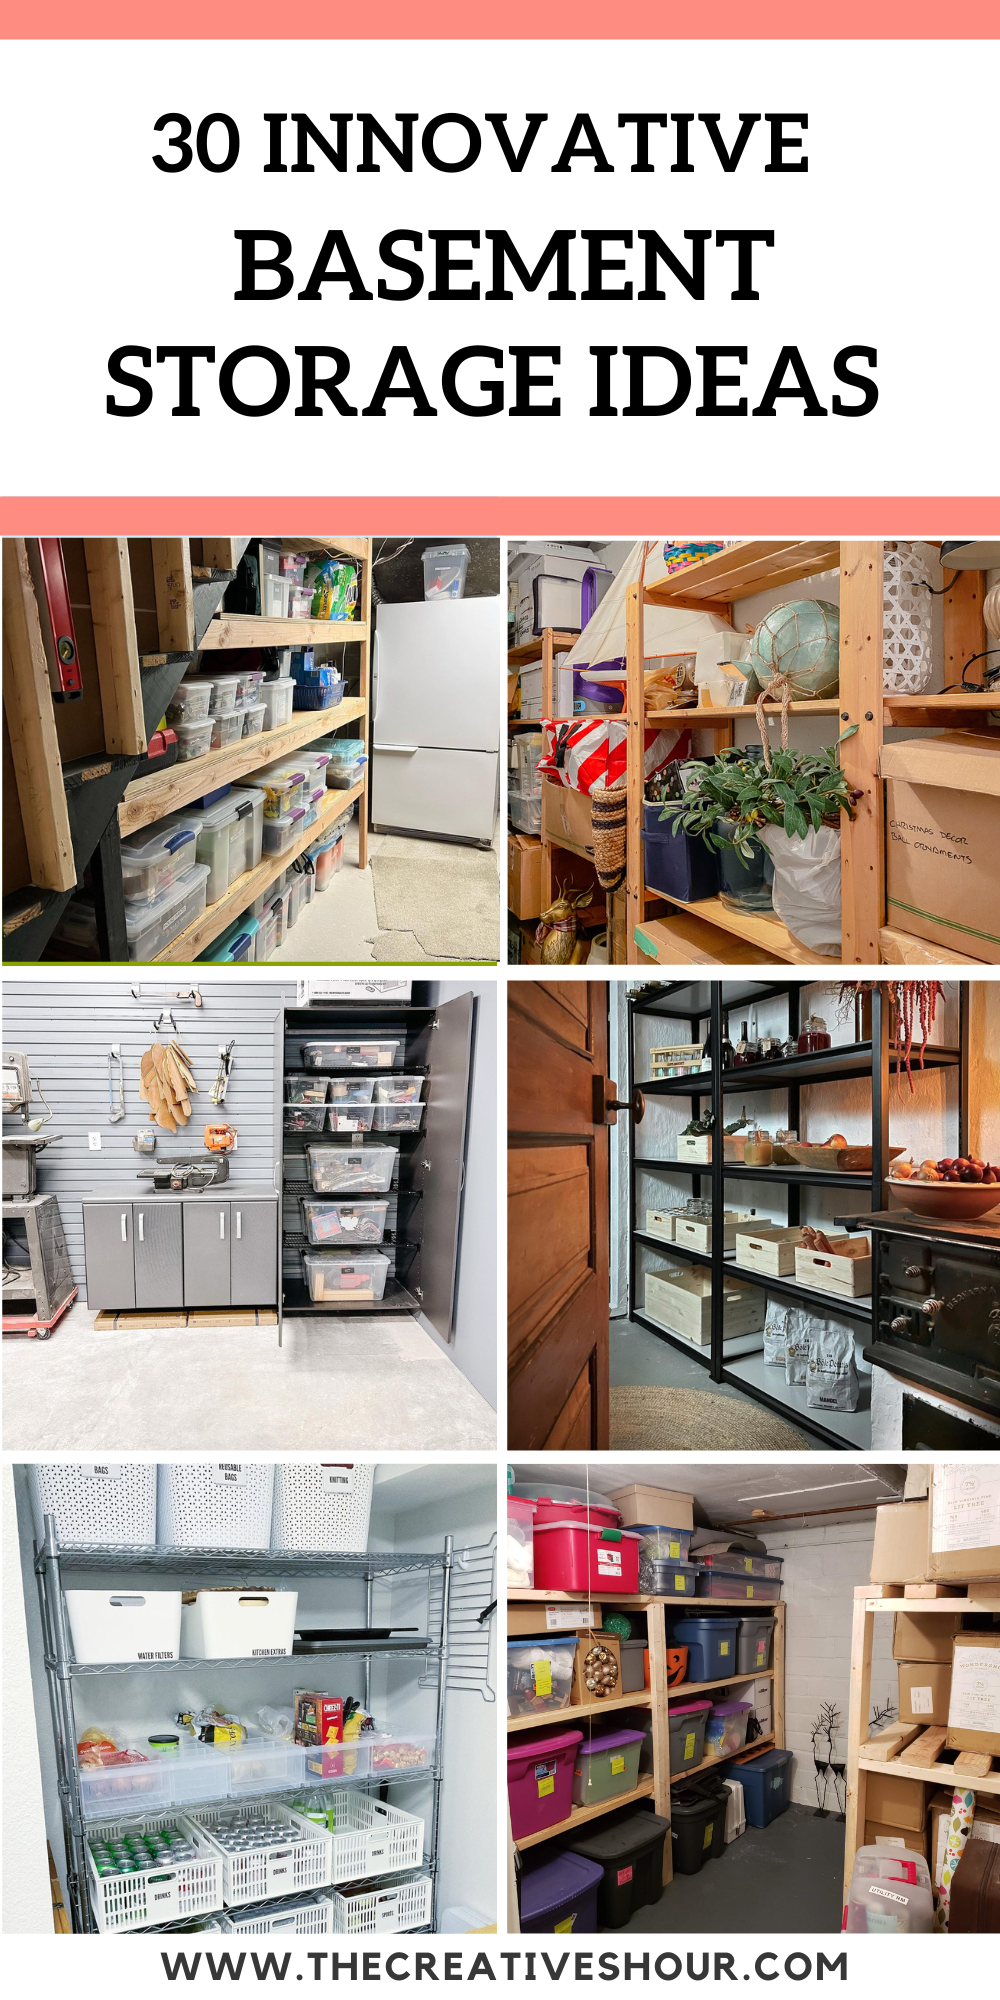 37 Basement Storage Ideas And 9 Organizing Tips - DigsDigs